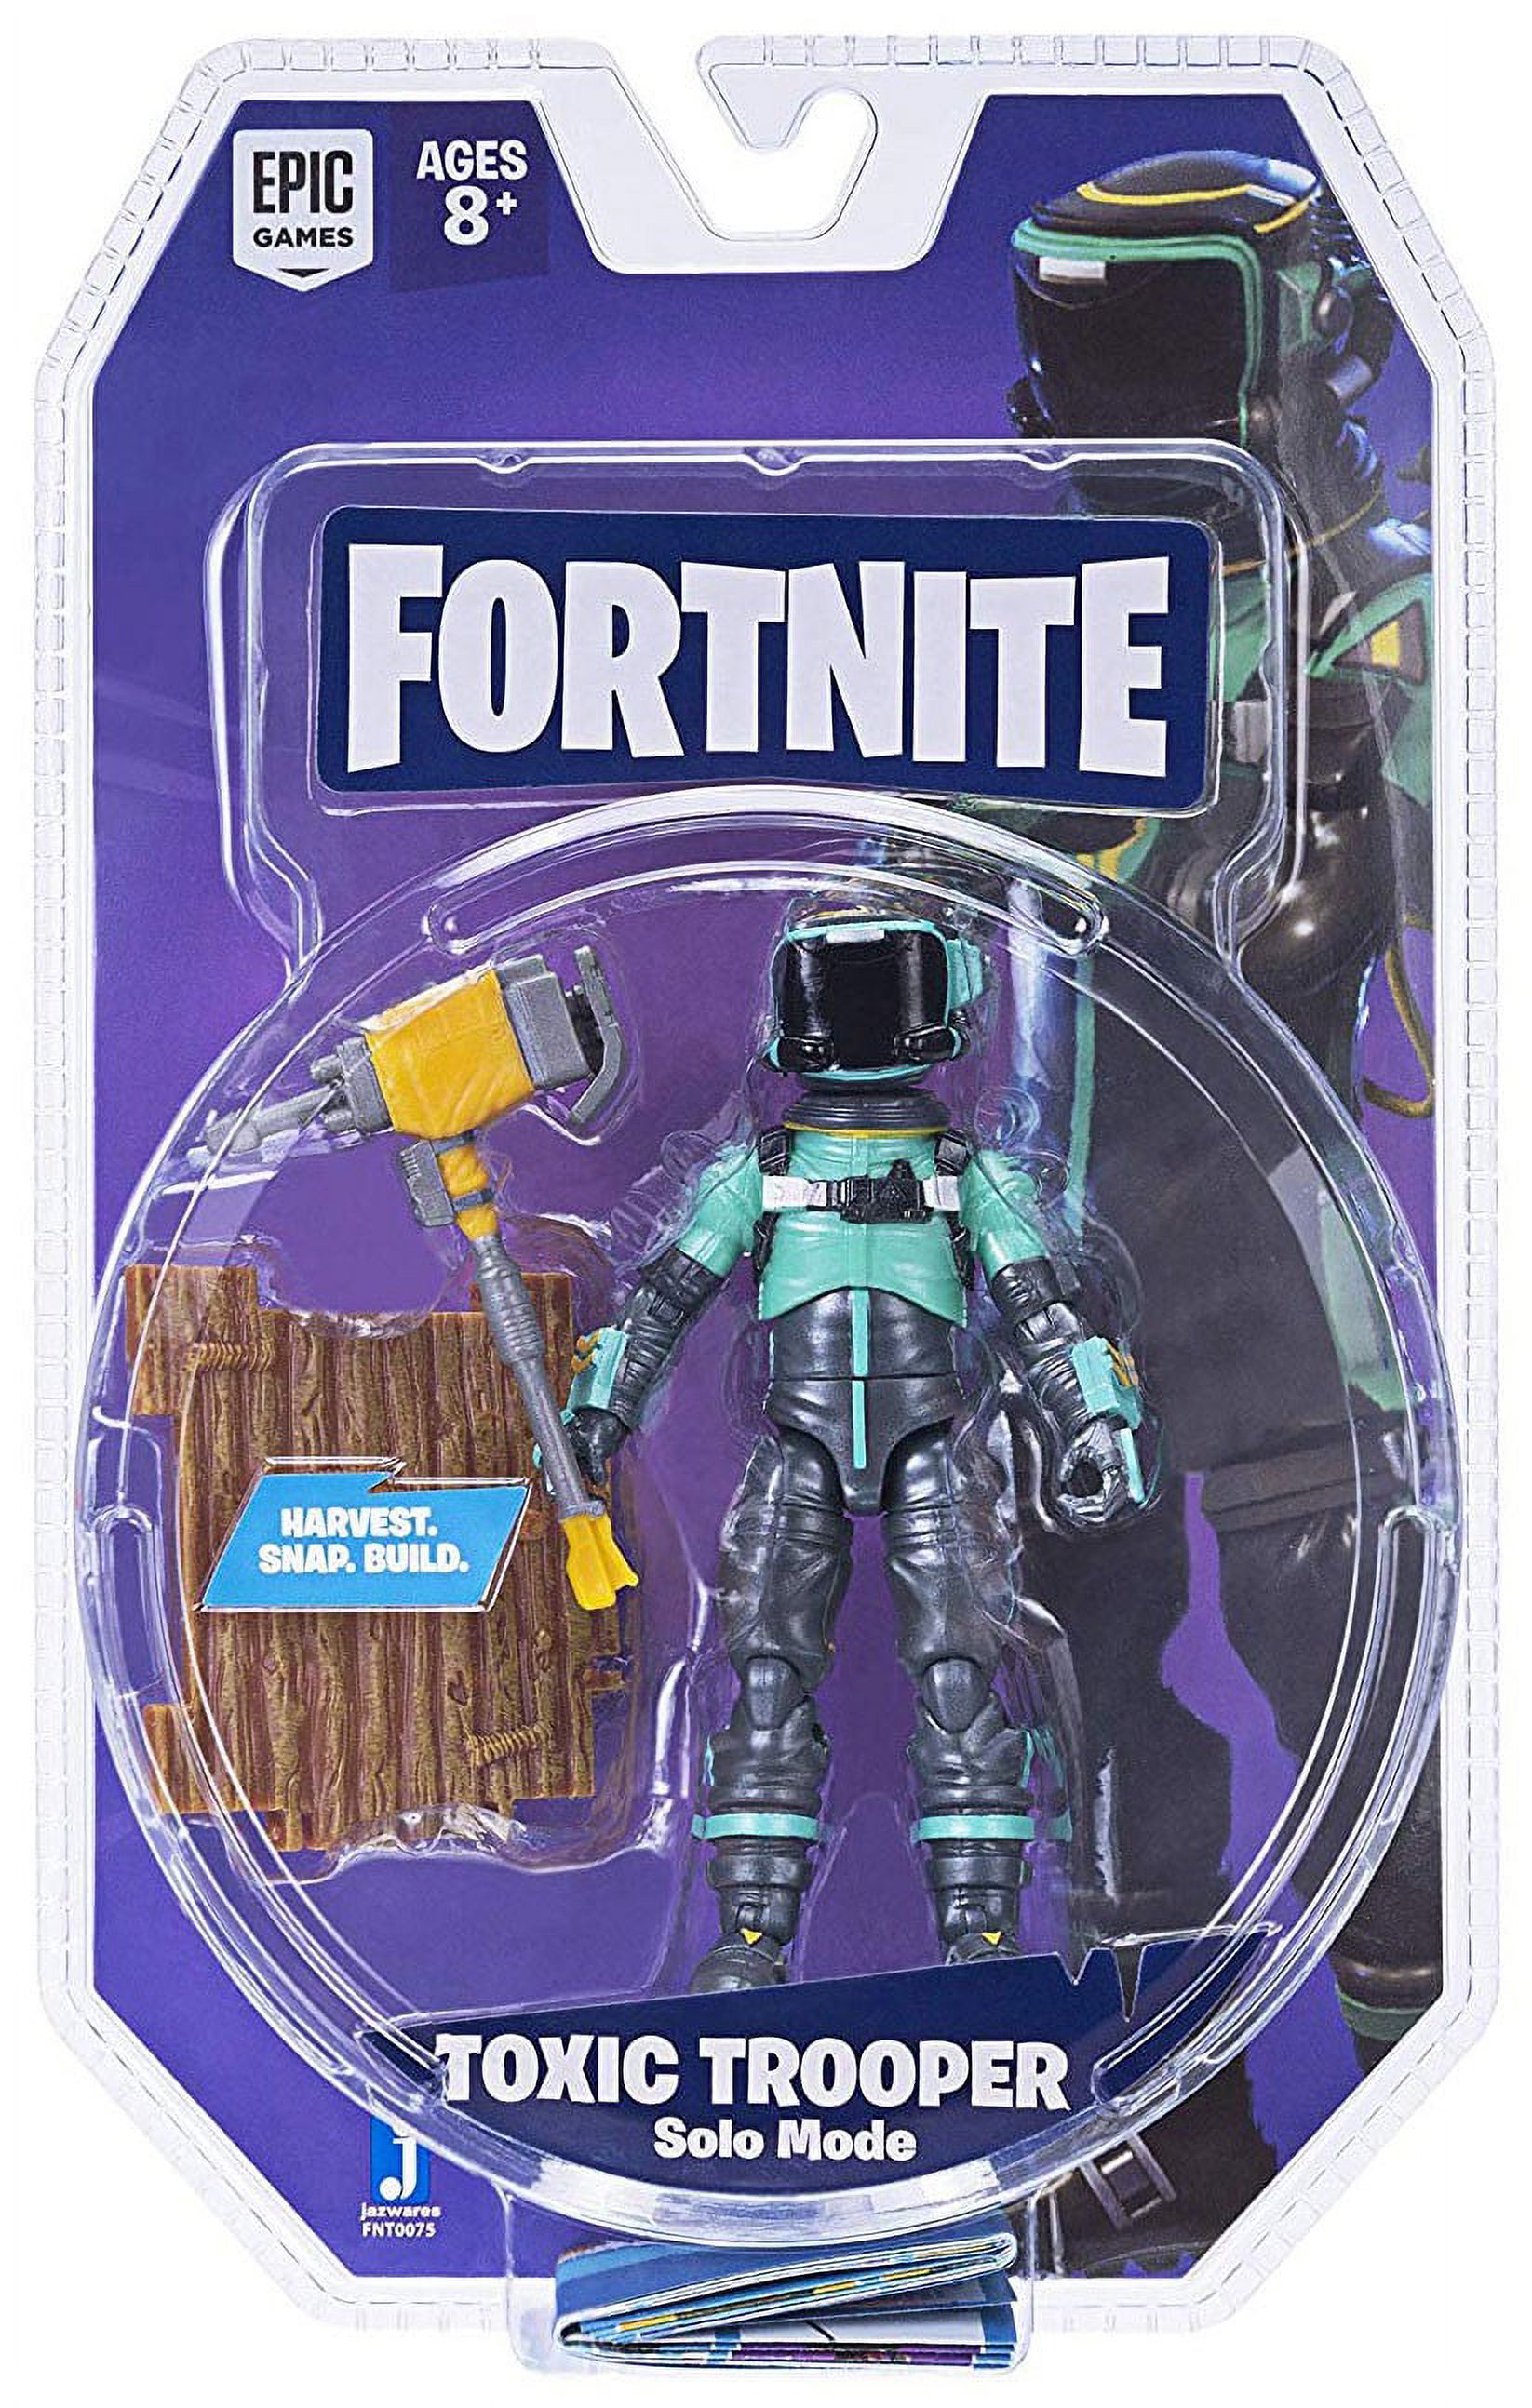 Fortnite Solo Mode Core Figure Pack, Toxic Trooper - image 3 of 3